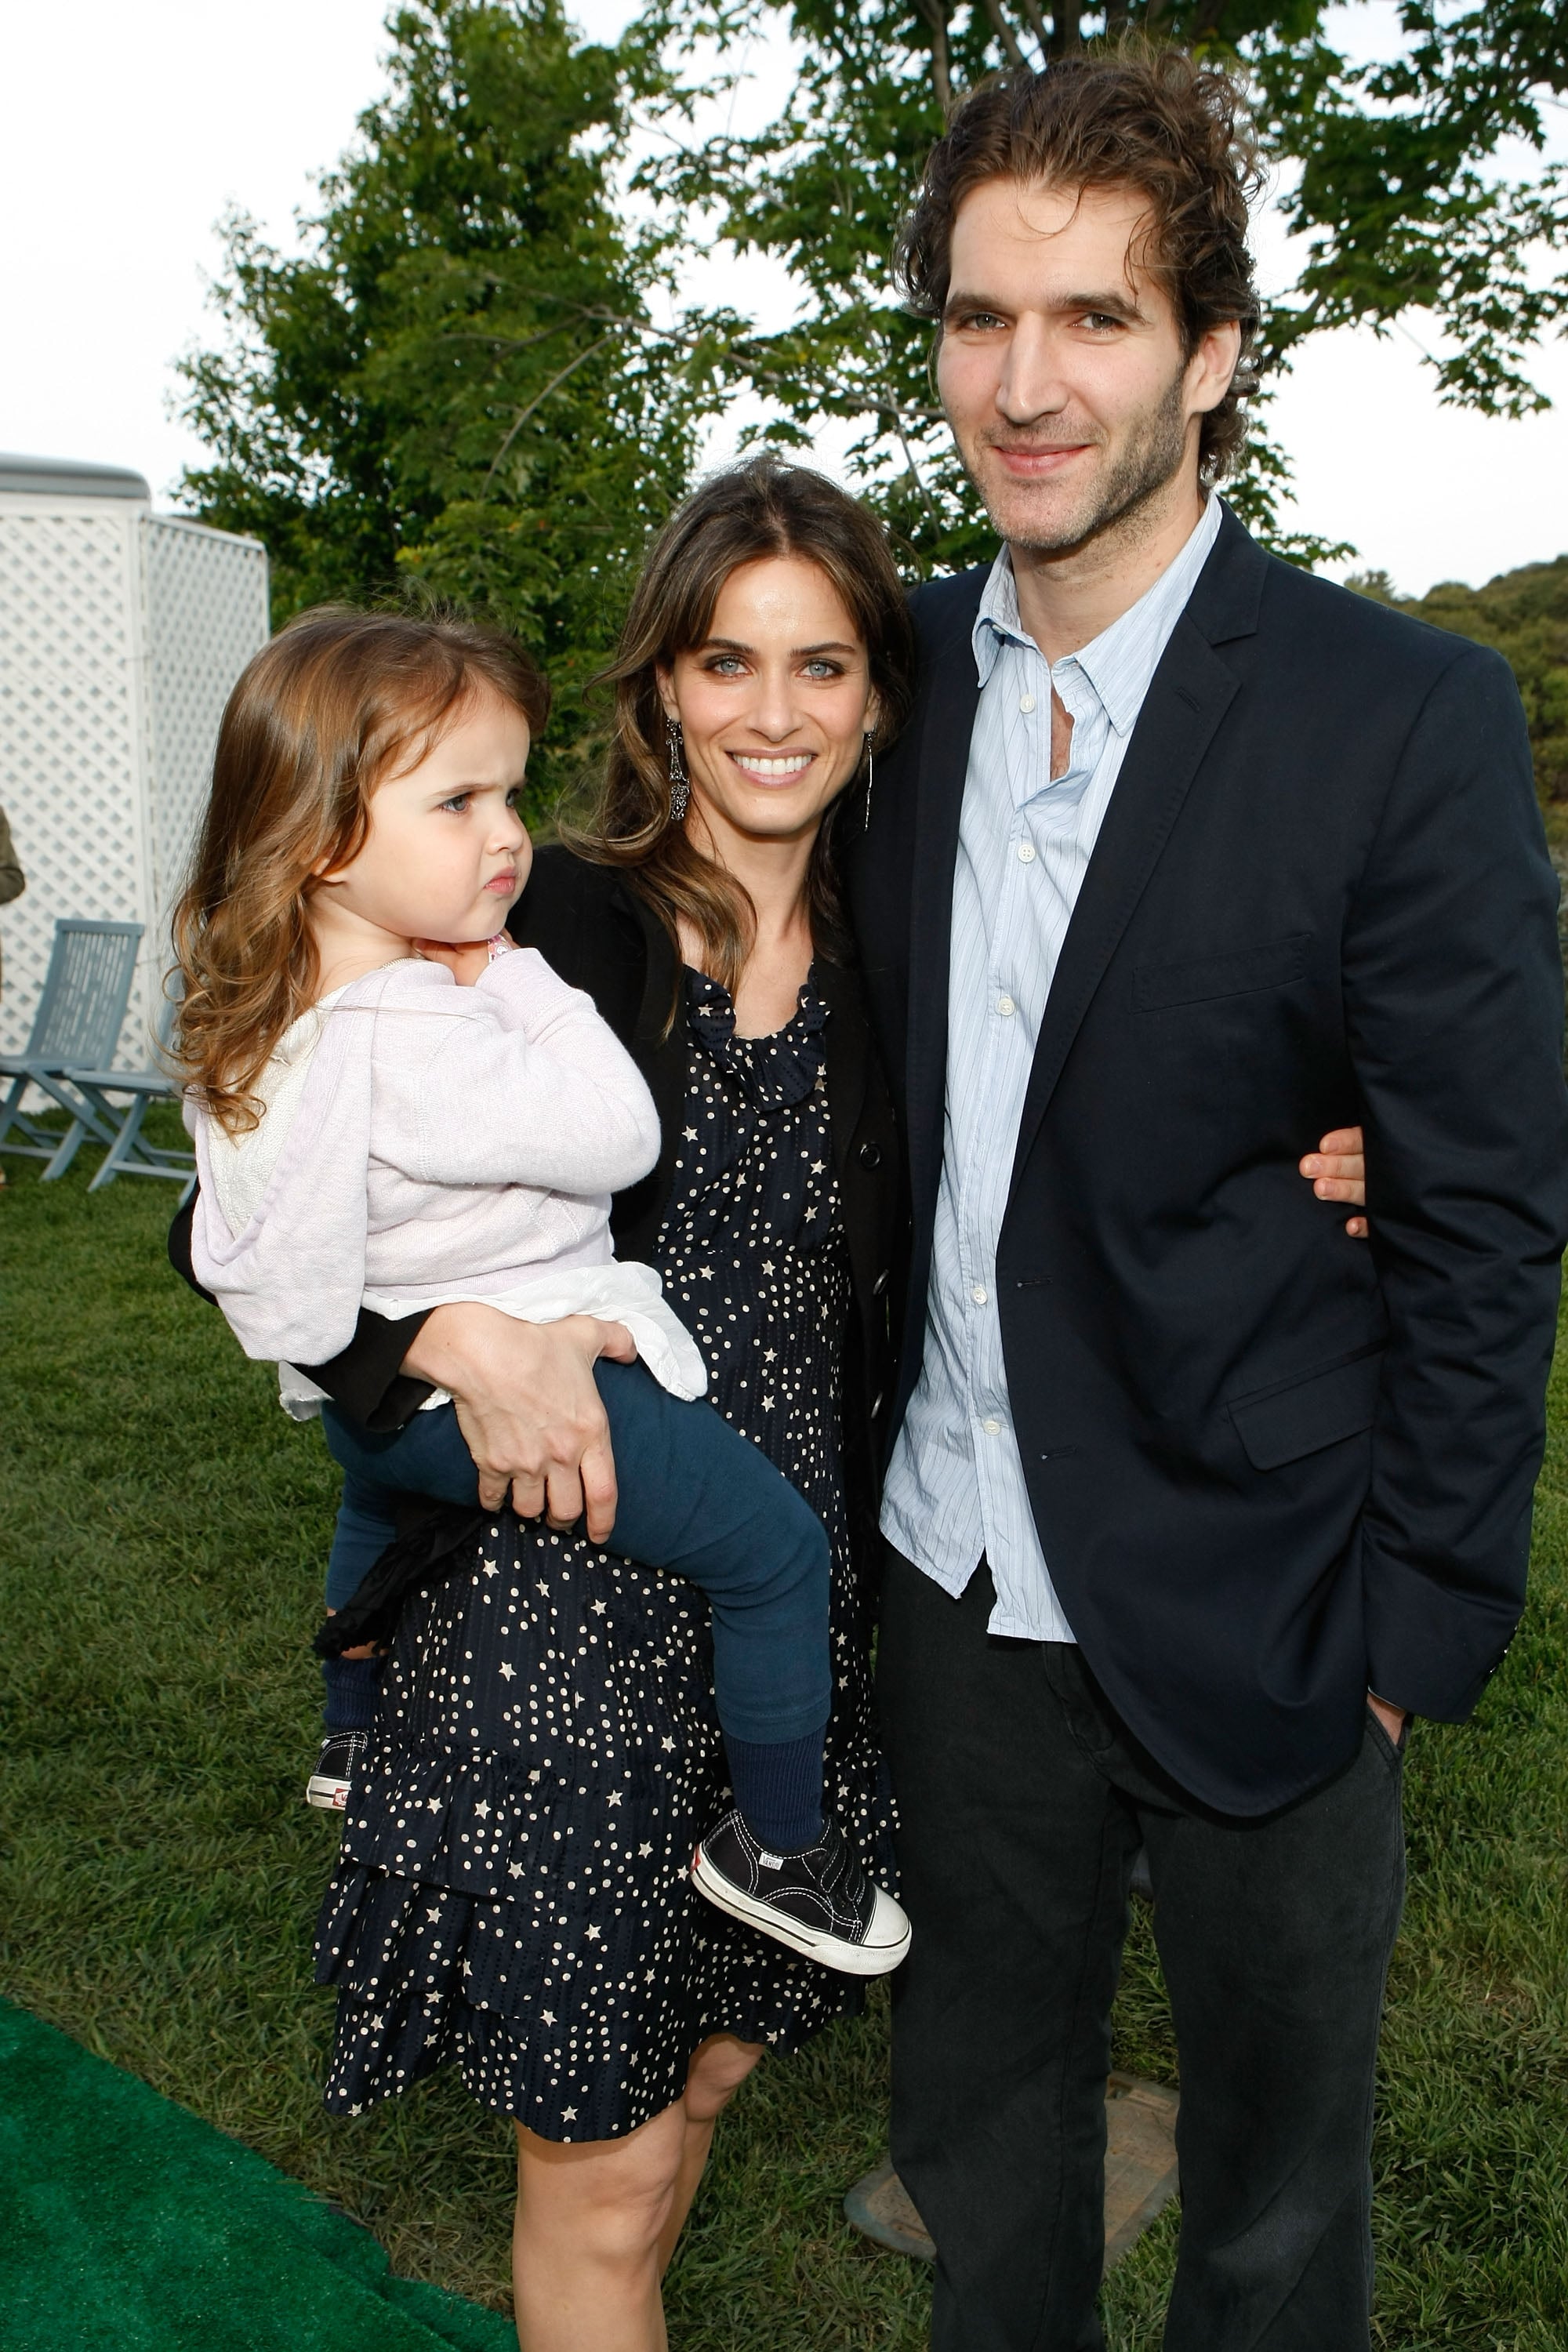 TOPANGA, CA - MAY 30:  (L-R) Frances Pen Benioff, Actress Amanda Peet and Writer David Benioff attend Michael J. Fox Foundation For Parkinson's Research Summer Lawn Party held at a Private Residence on May 30, 2009 in Topanga, California.  (Photo by Michael Buckner/Getty Images for Michael J. Fox Foundation for Parkinson's Research)